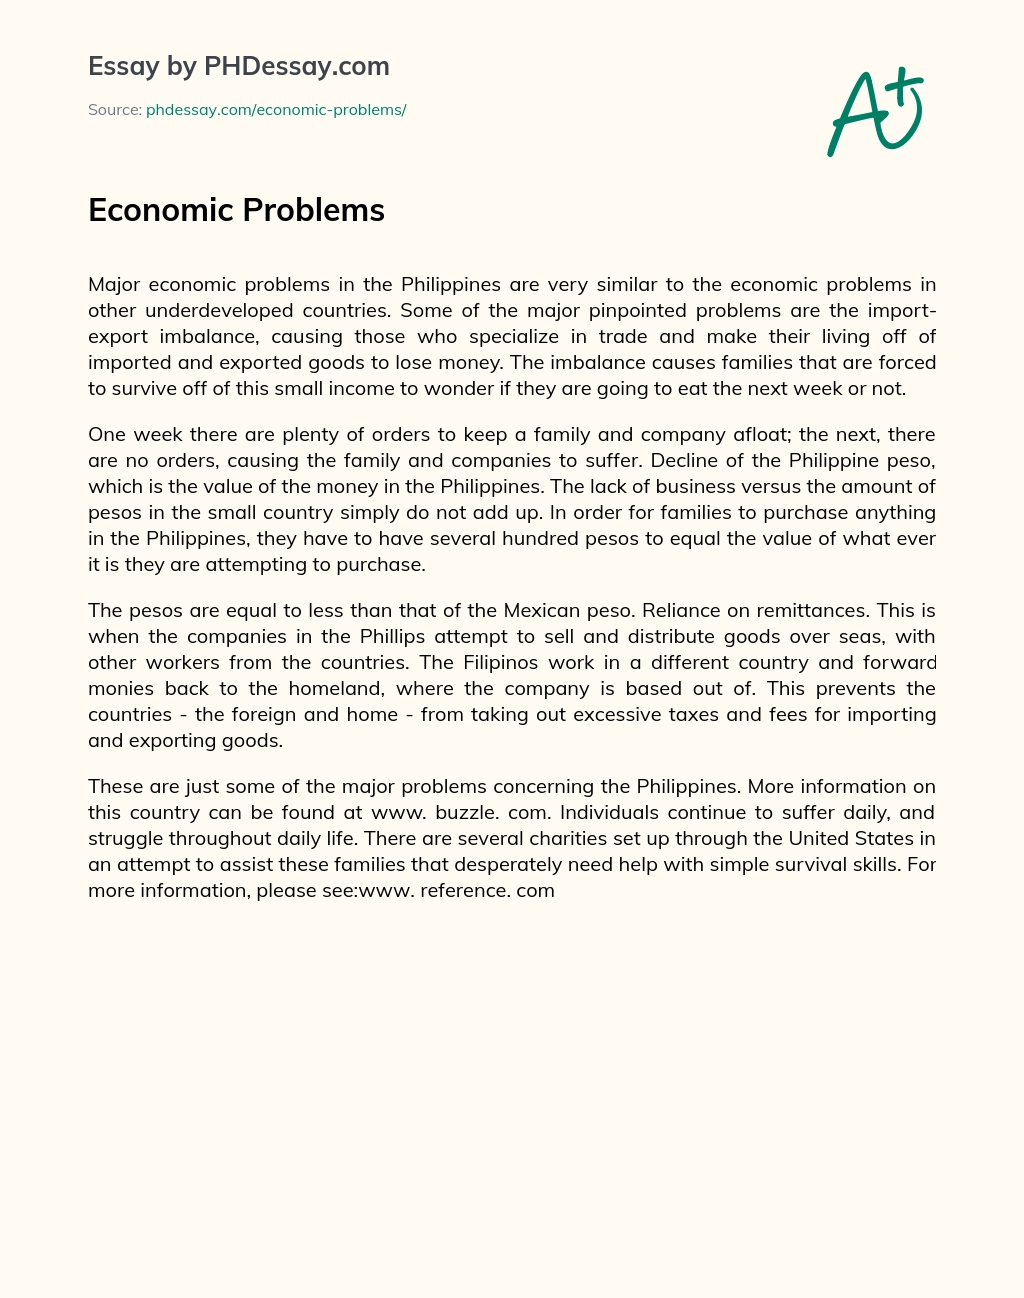 how to solve economic problems as a student essay